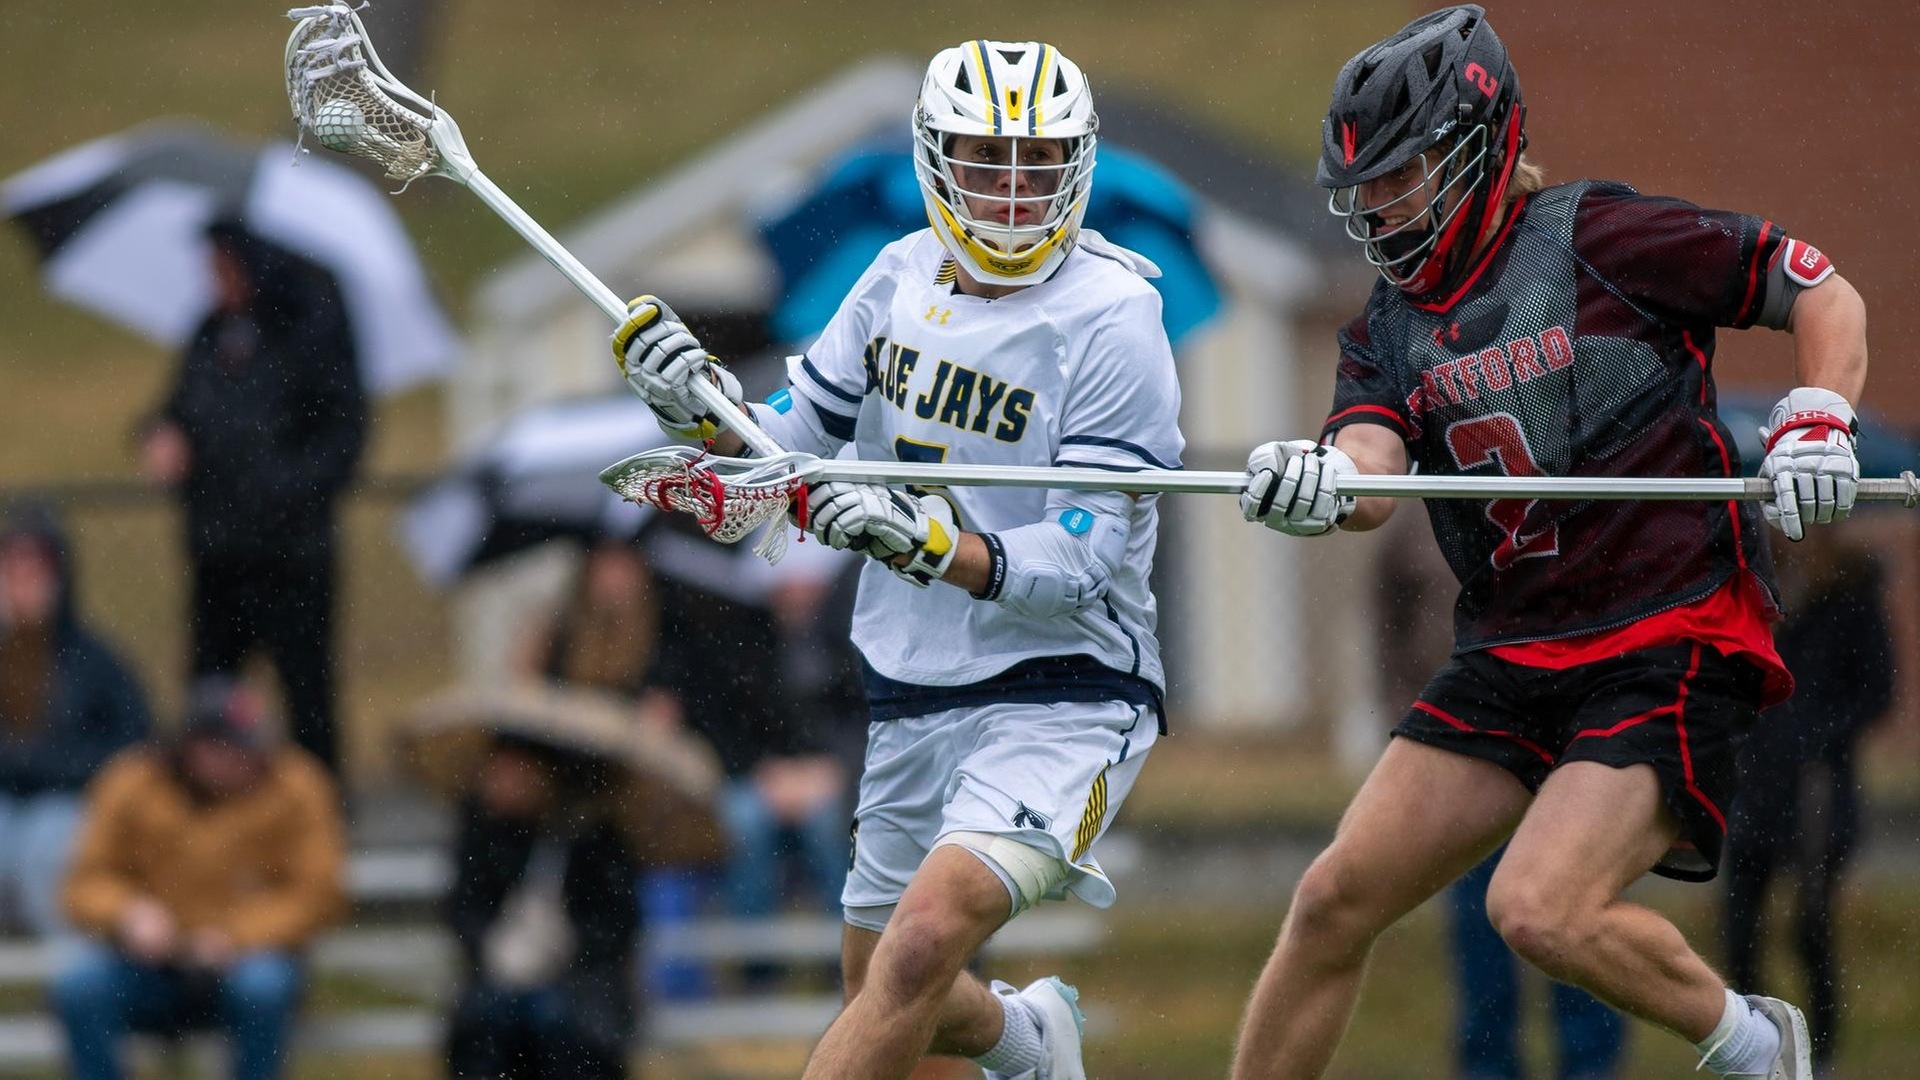 Men's Lacrosse Falls at Home to Emmanuel, 10-4, During GNAC Play Tuesday